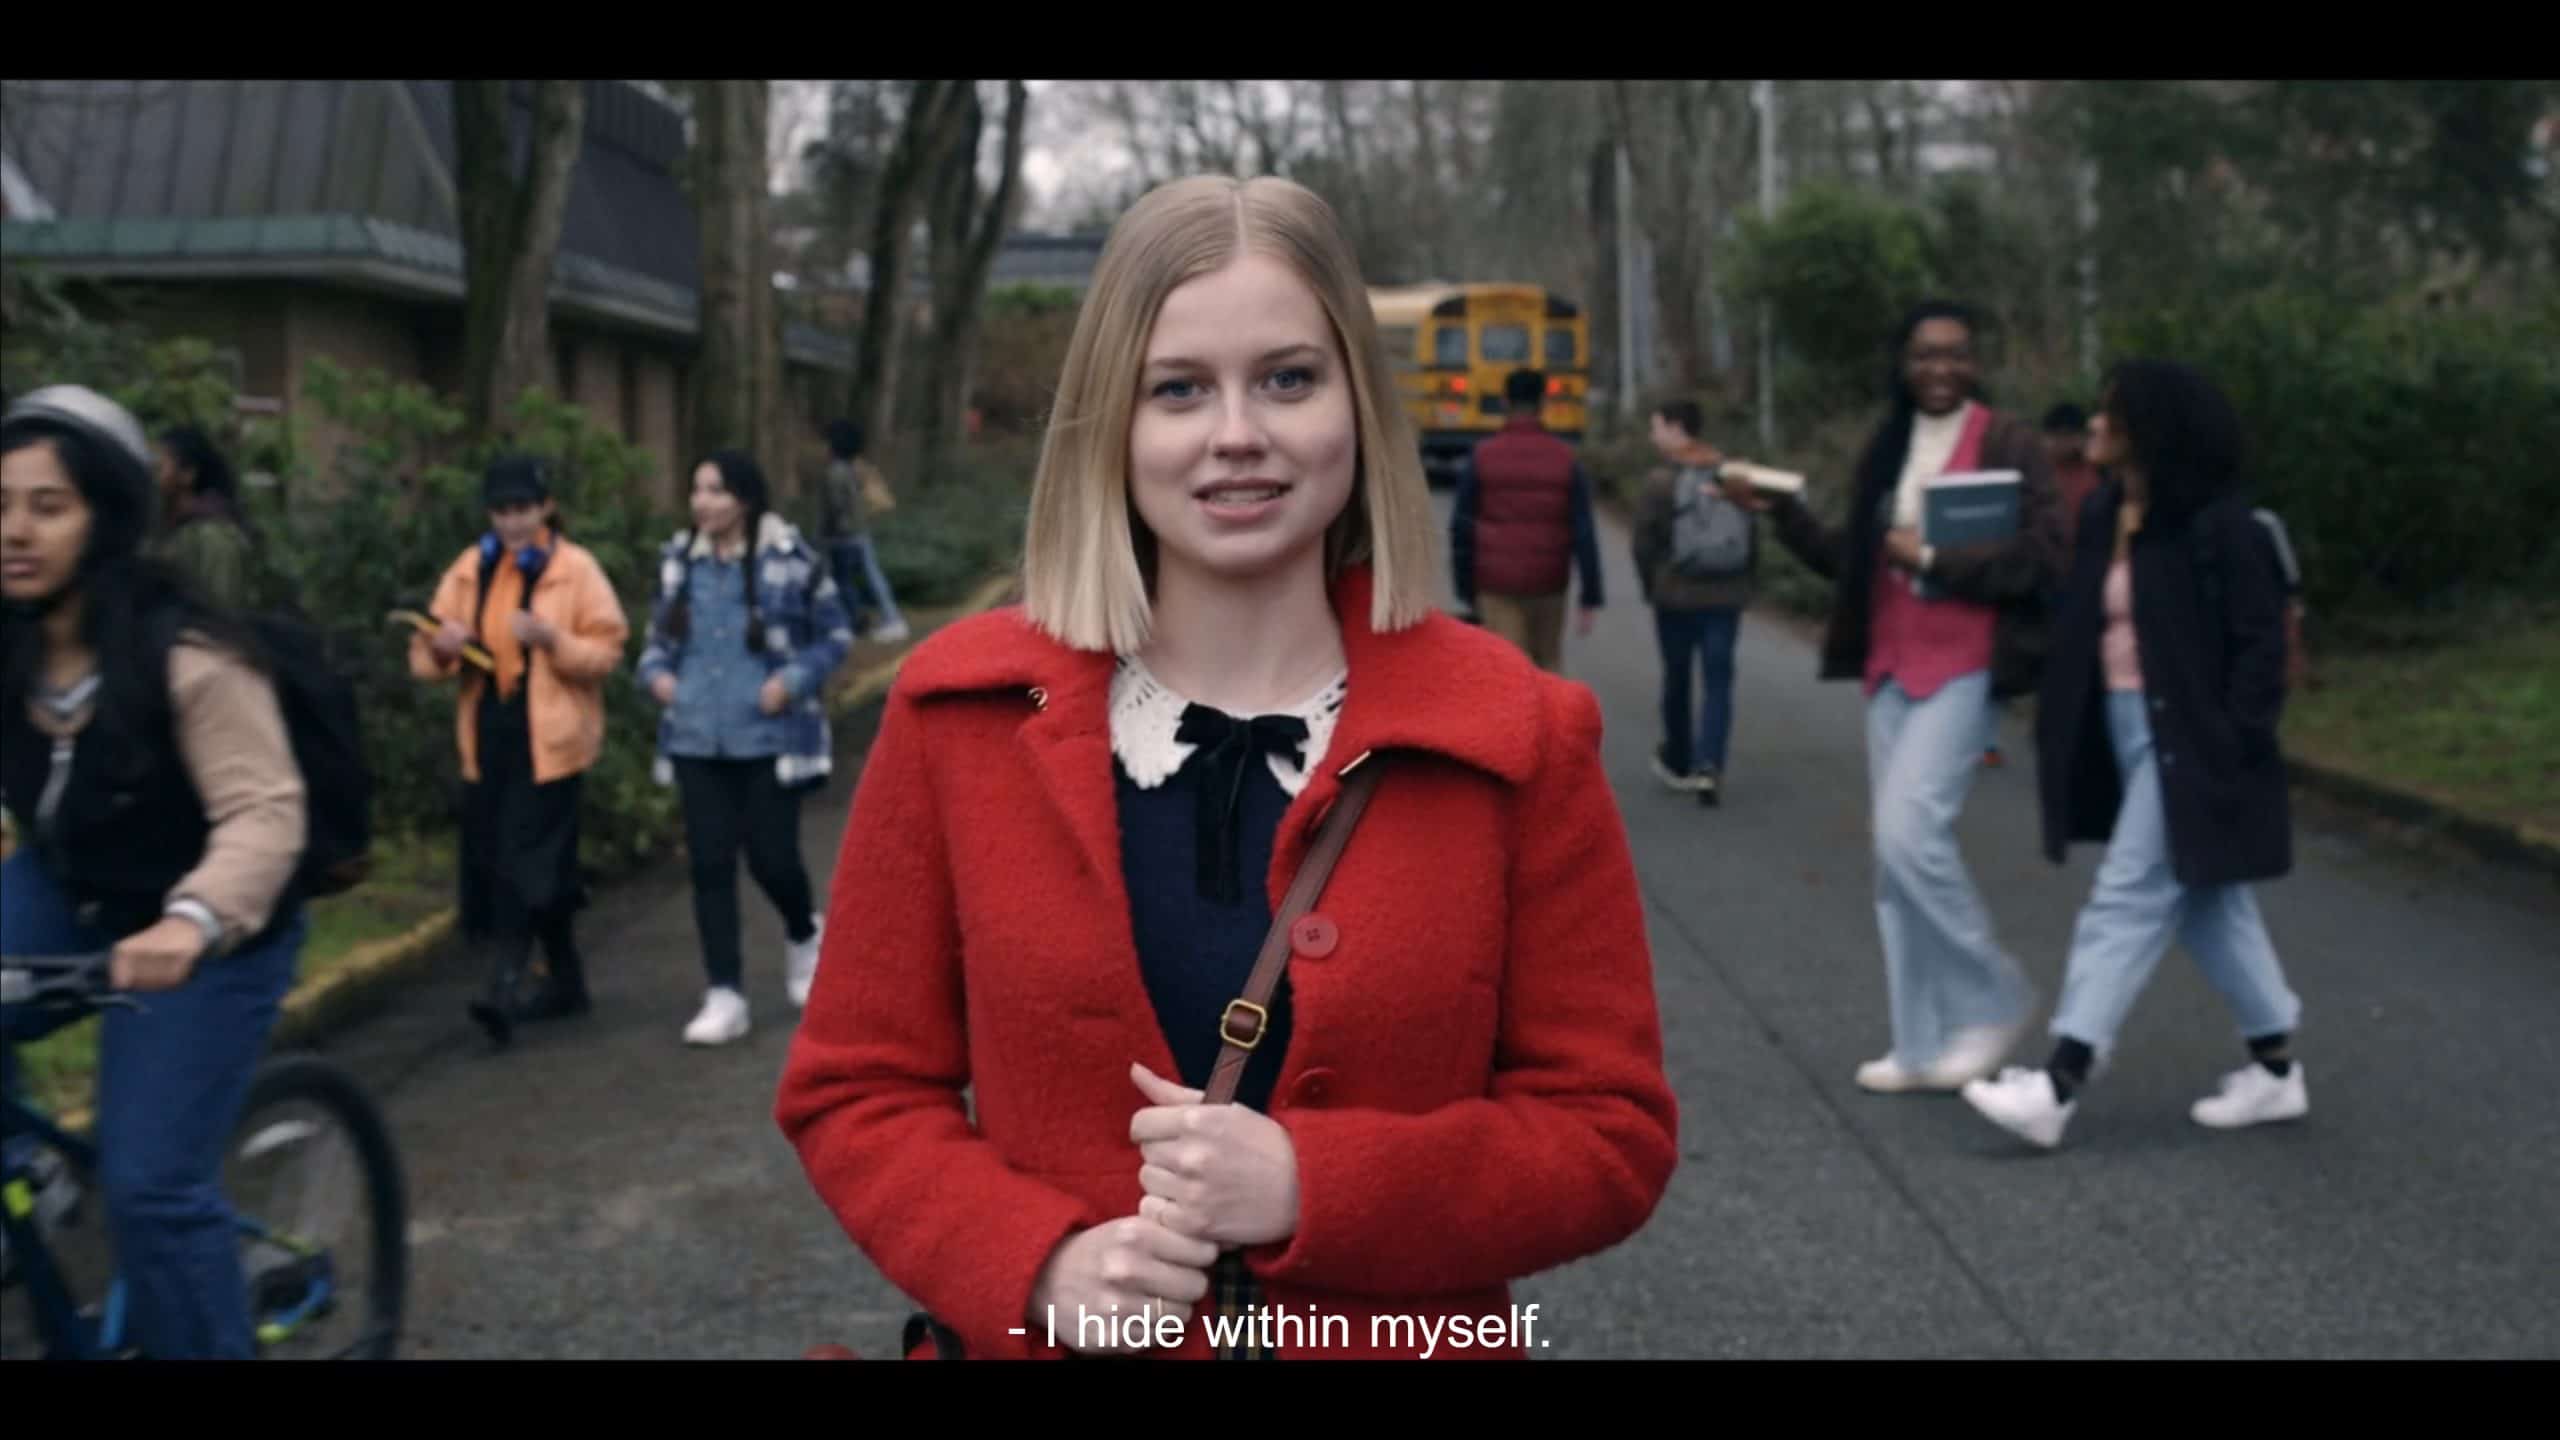 Honor (Angourie Rice) noting she hides within herself